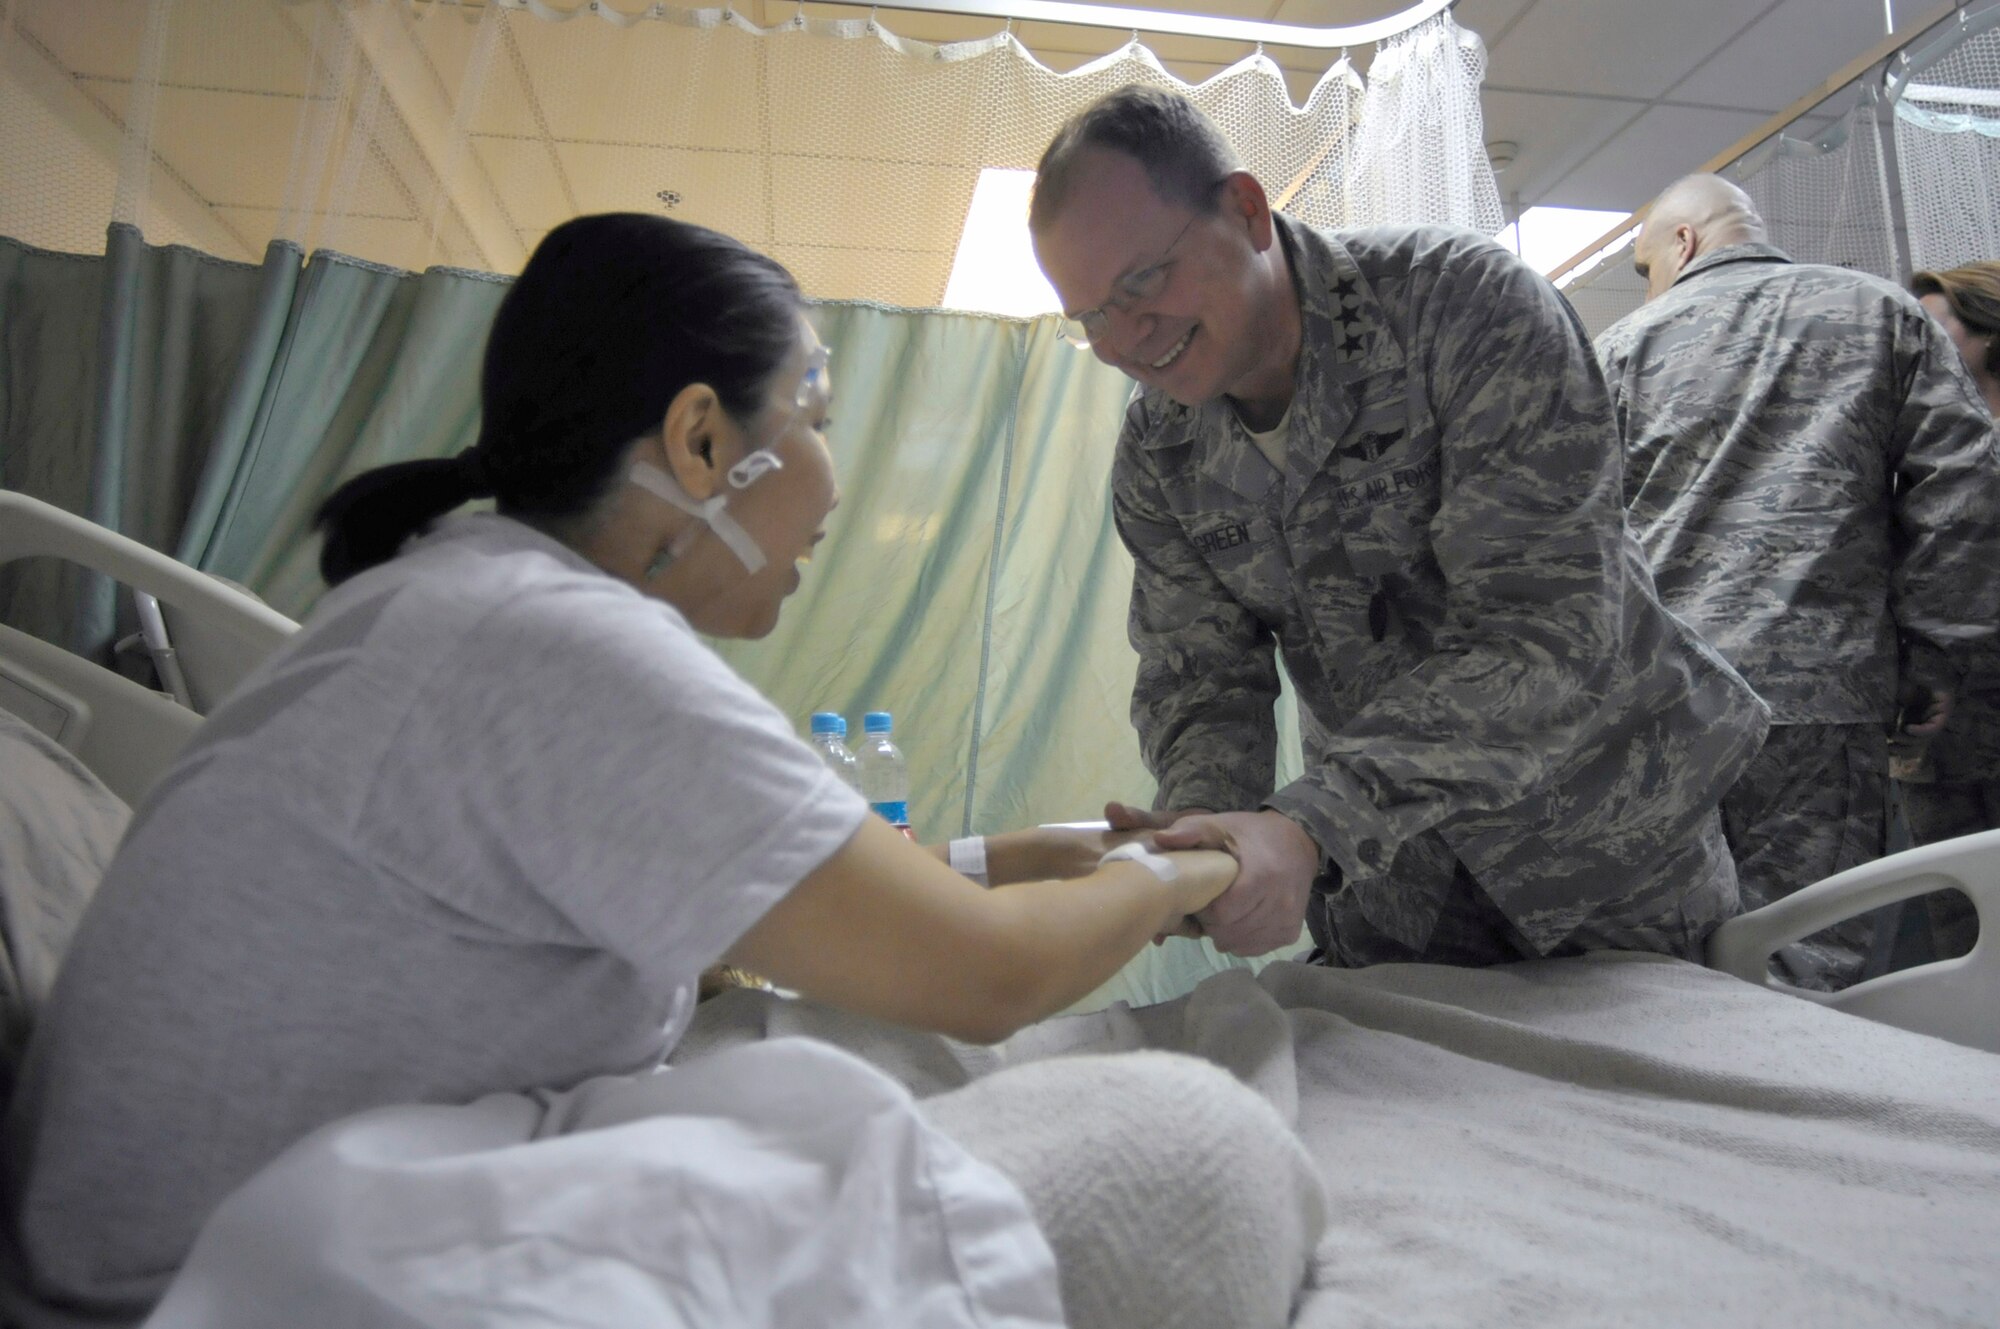 Air Force Surgeon General Lt. Gen. (Dr.) Charles B. Green visits Senior Airman Diane Bautista Feb. 13, 2011, during a visit to the Craig Joint Theater Hospital at Bagram Airfield, Afghanistan. Airman Bautista is a medic assigned to the 455th Expeditionary Medical Group. (U.S. Air Force photo/Tech. Sgt. Michael Voss) 